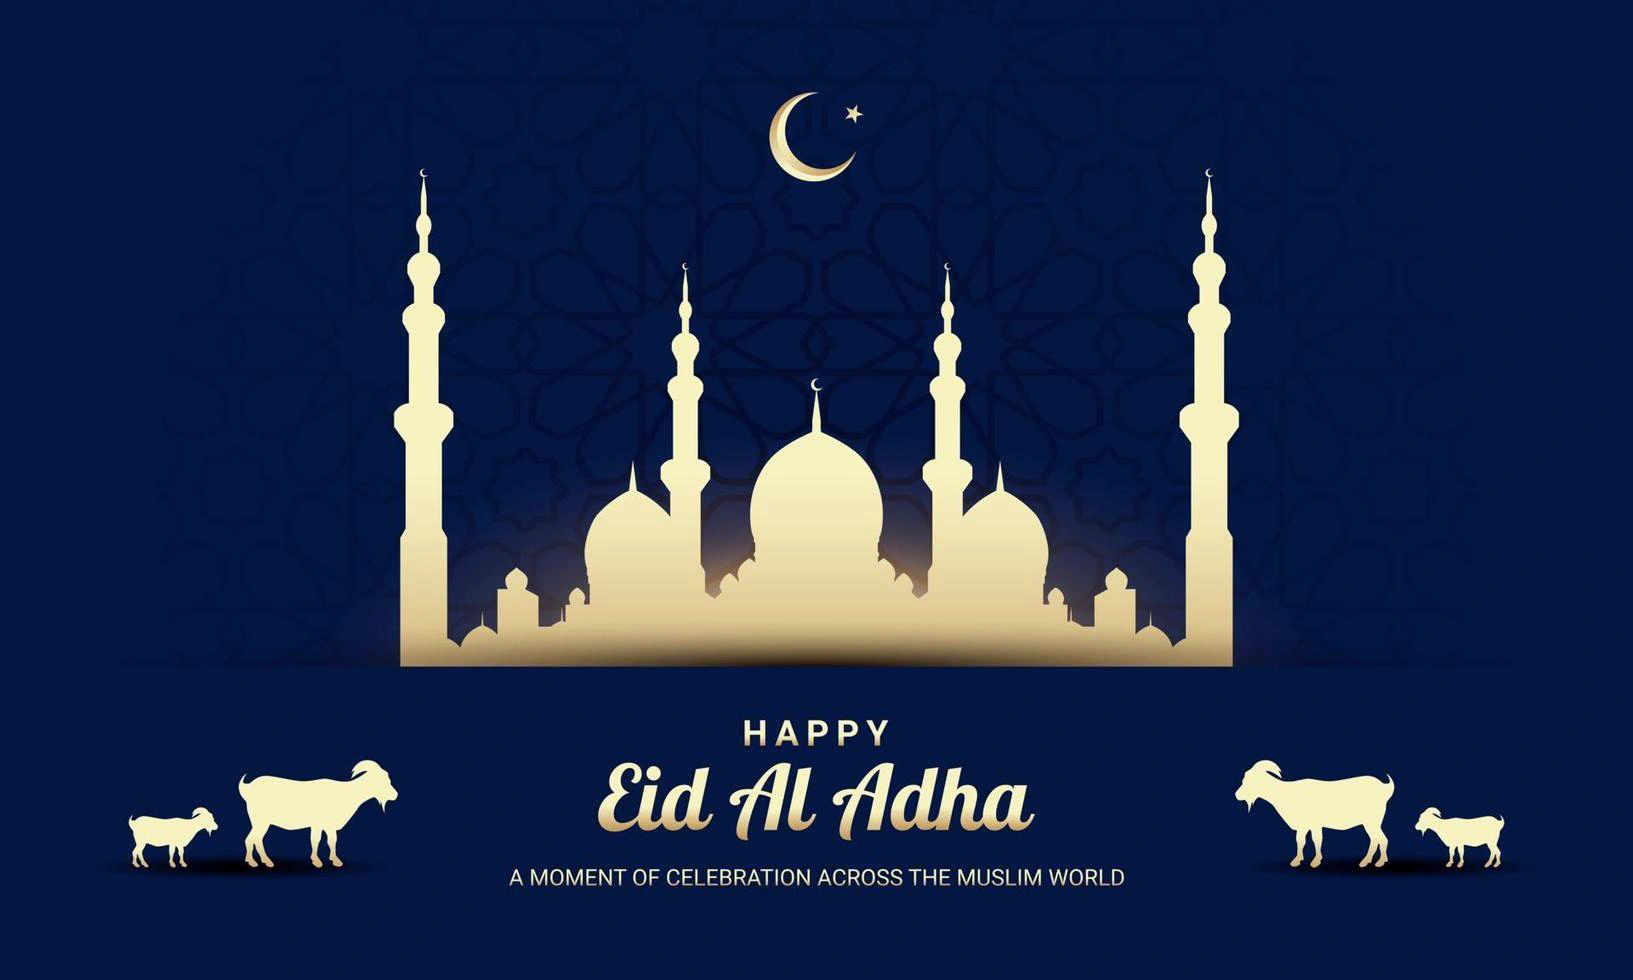 eid al adha background fit for greeting card wallpaper and other vector